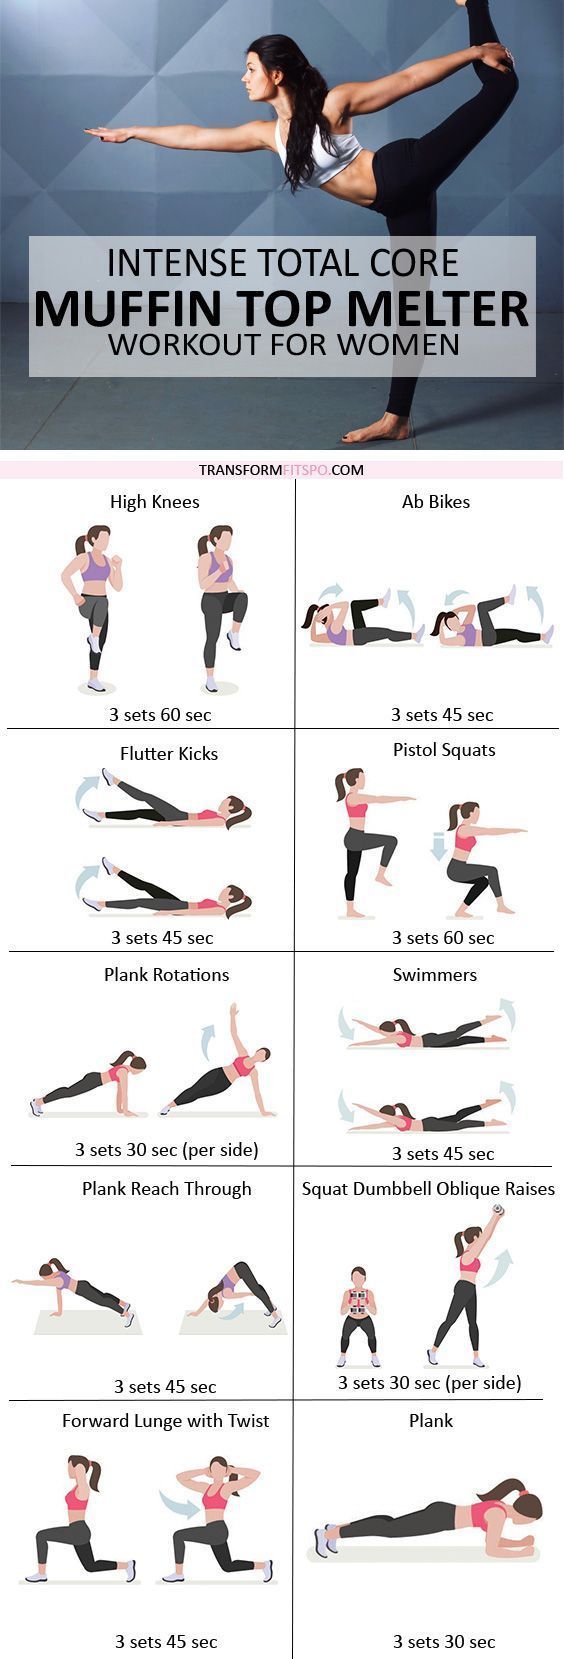 11 fitness Mujer busto ideas